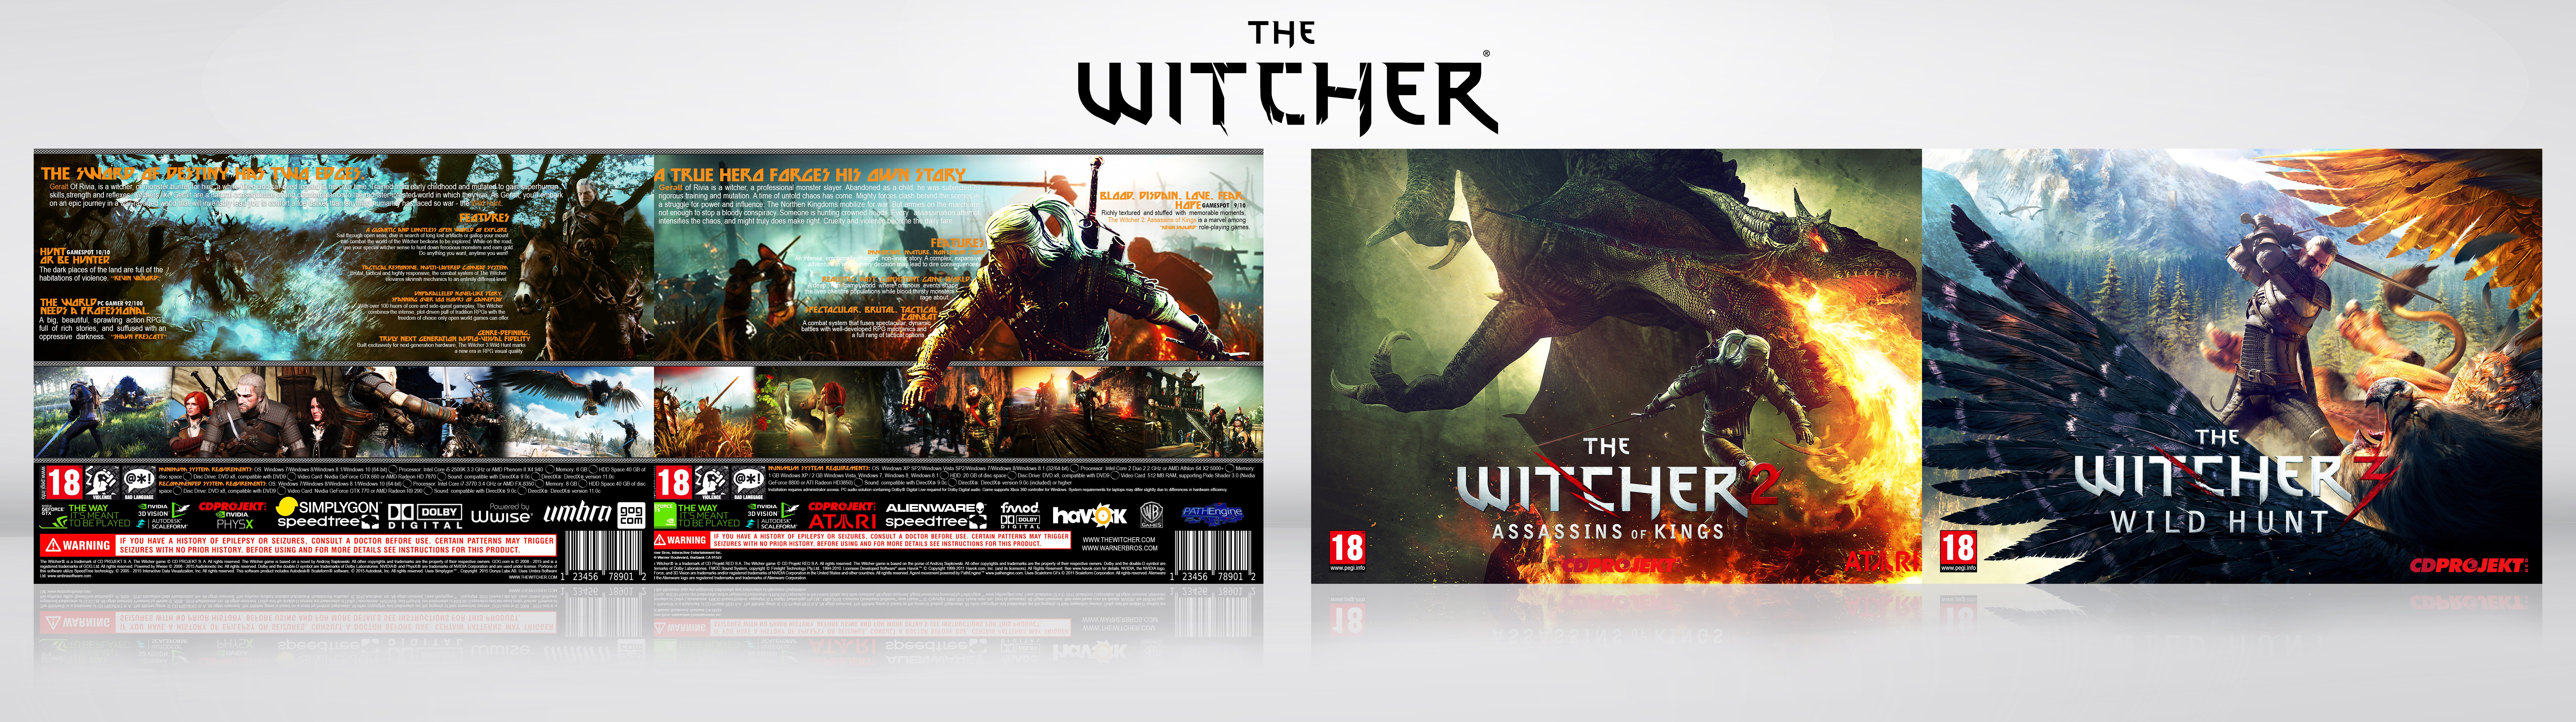 The Witcher Collection box cover